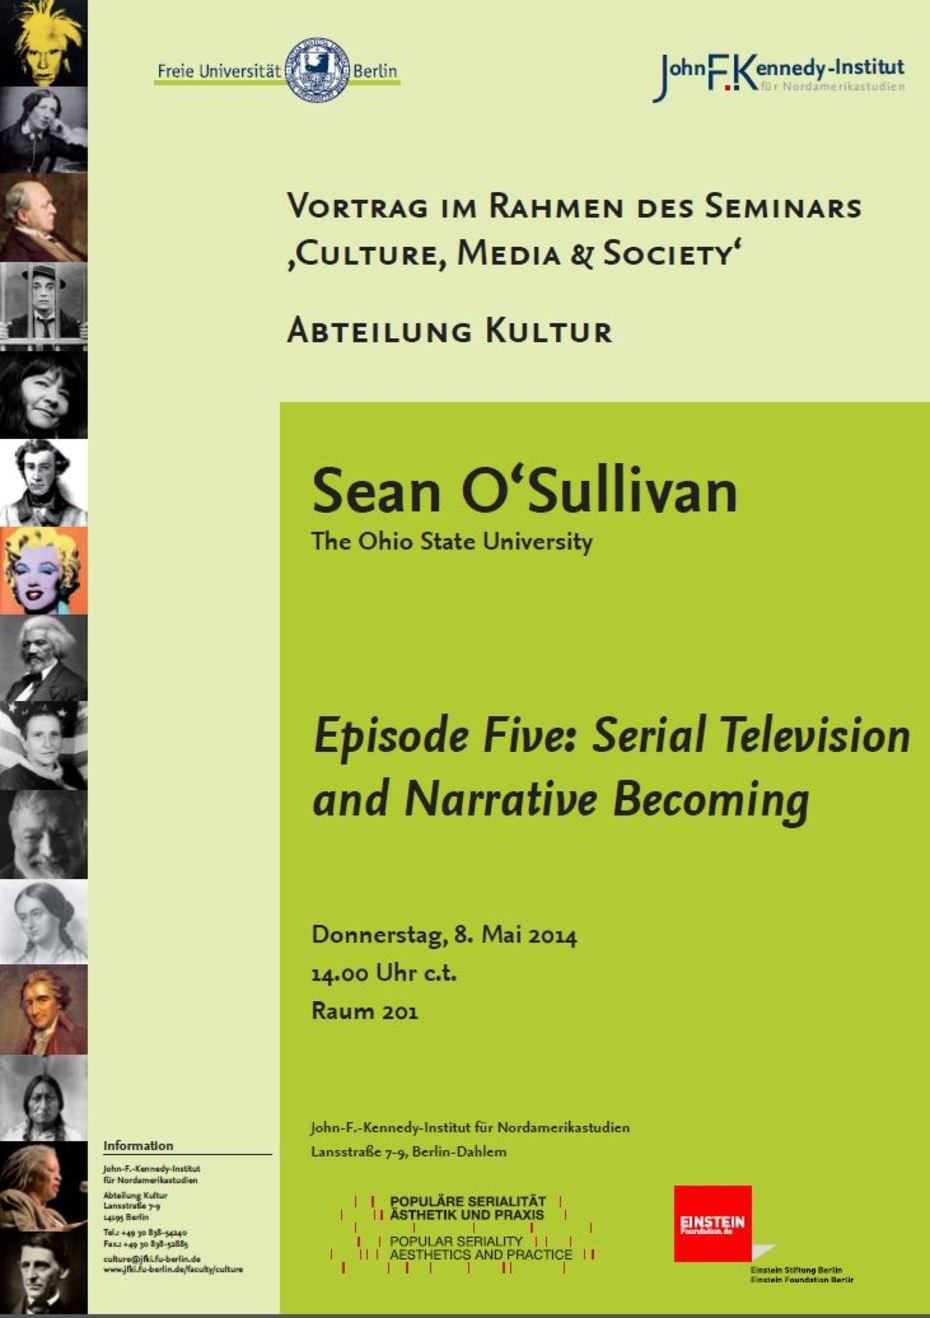 Episode Five: Serial Television and Narrative Becoming